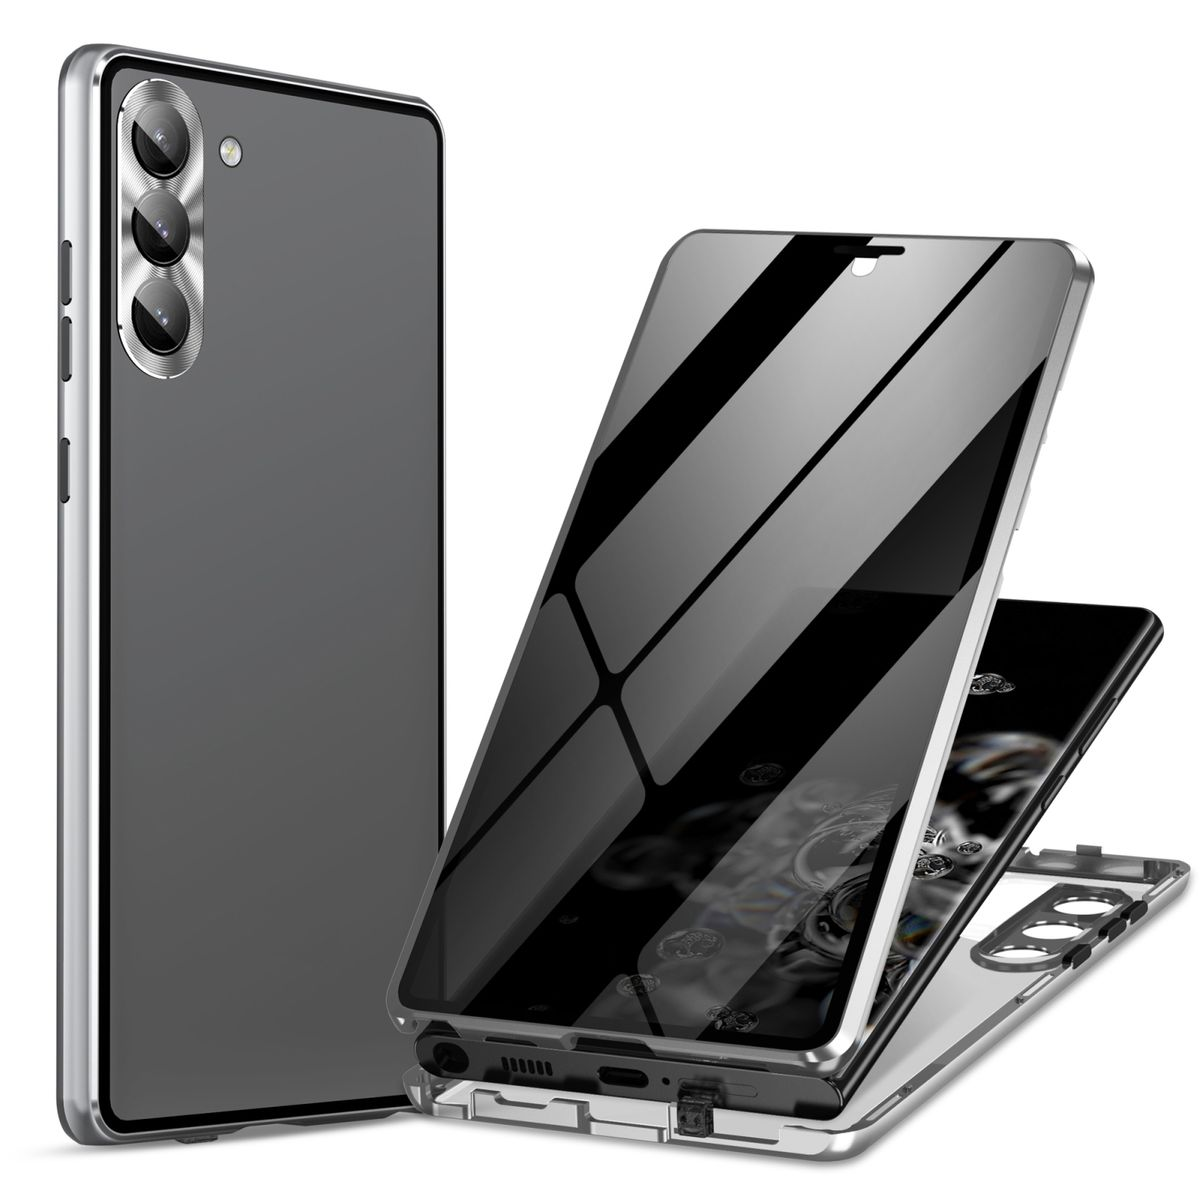 Glas Plus, S24 WIGENTO Cover, 360 / Silber / Privacy Transparent Grad Galaxy Magnet Hülle, Beidseitiger Samsung, Full